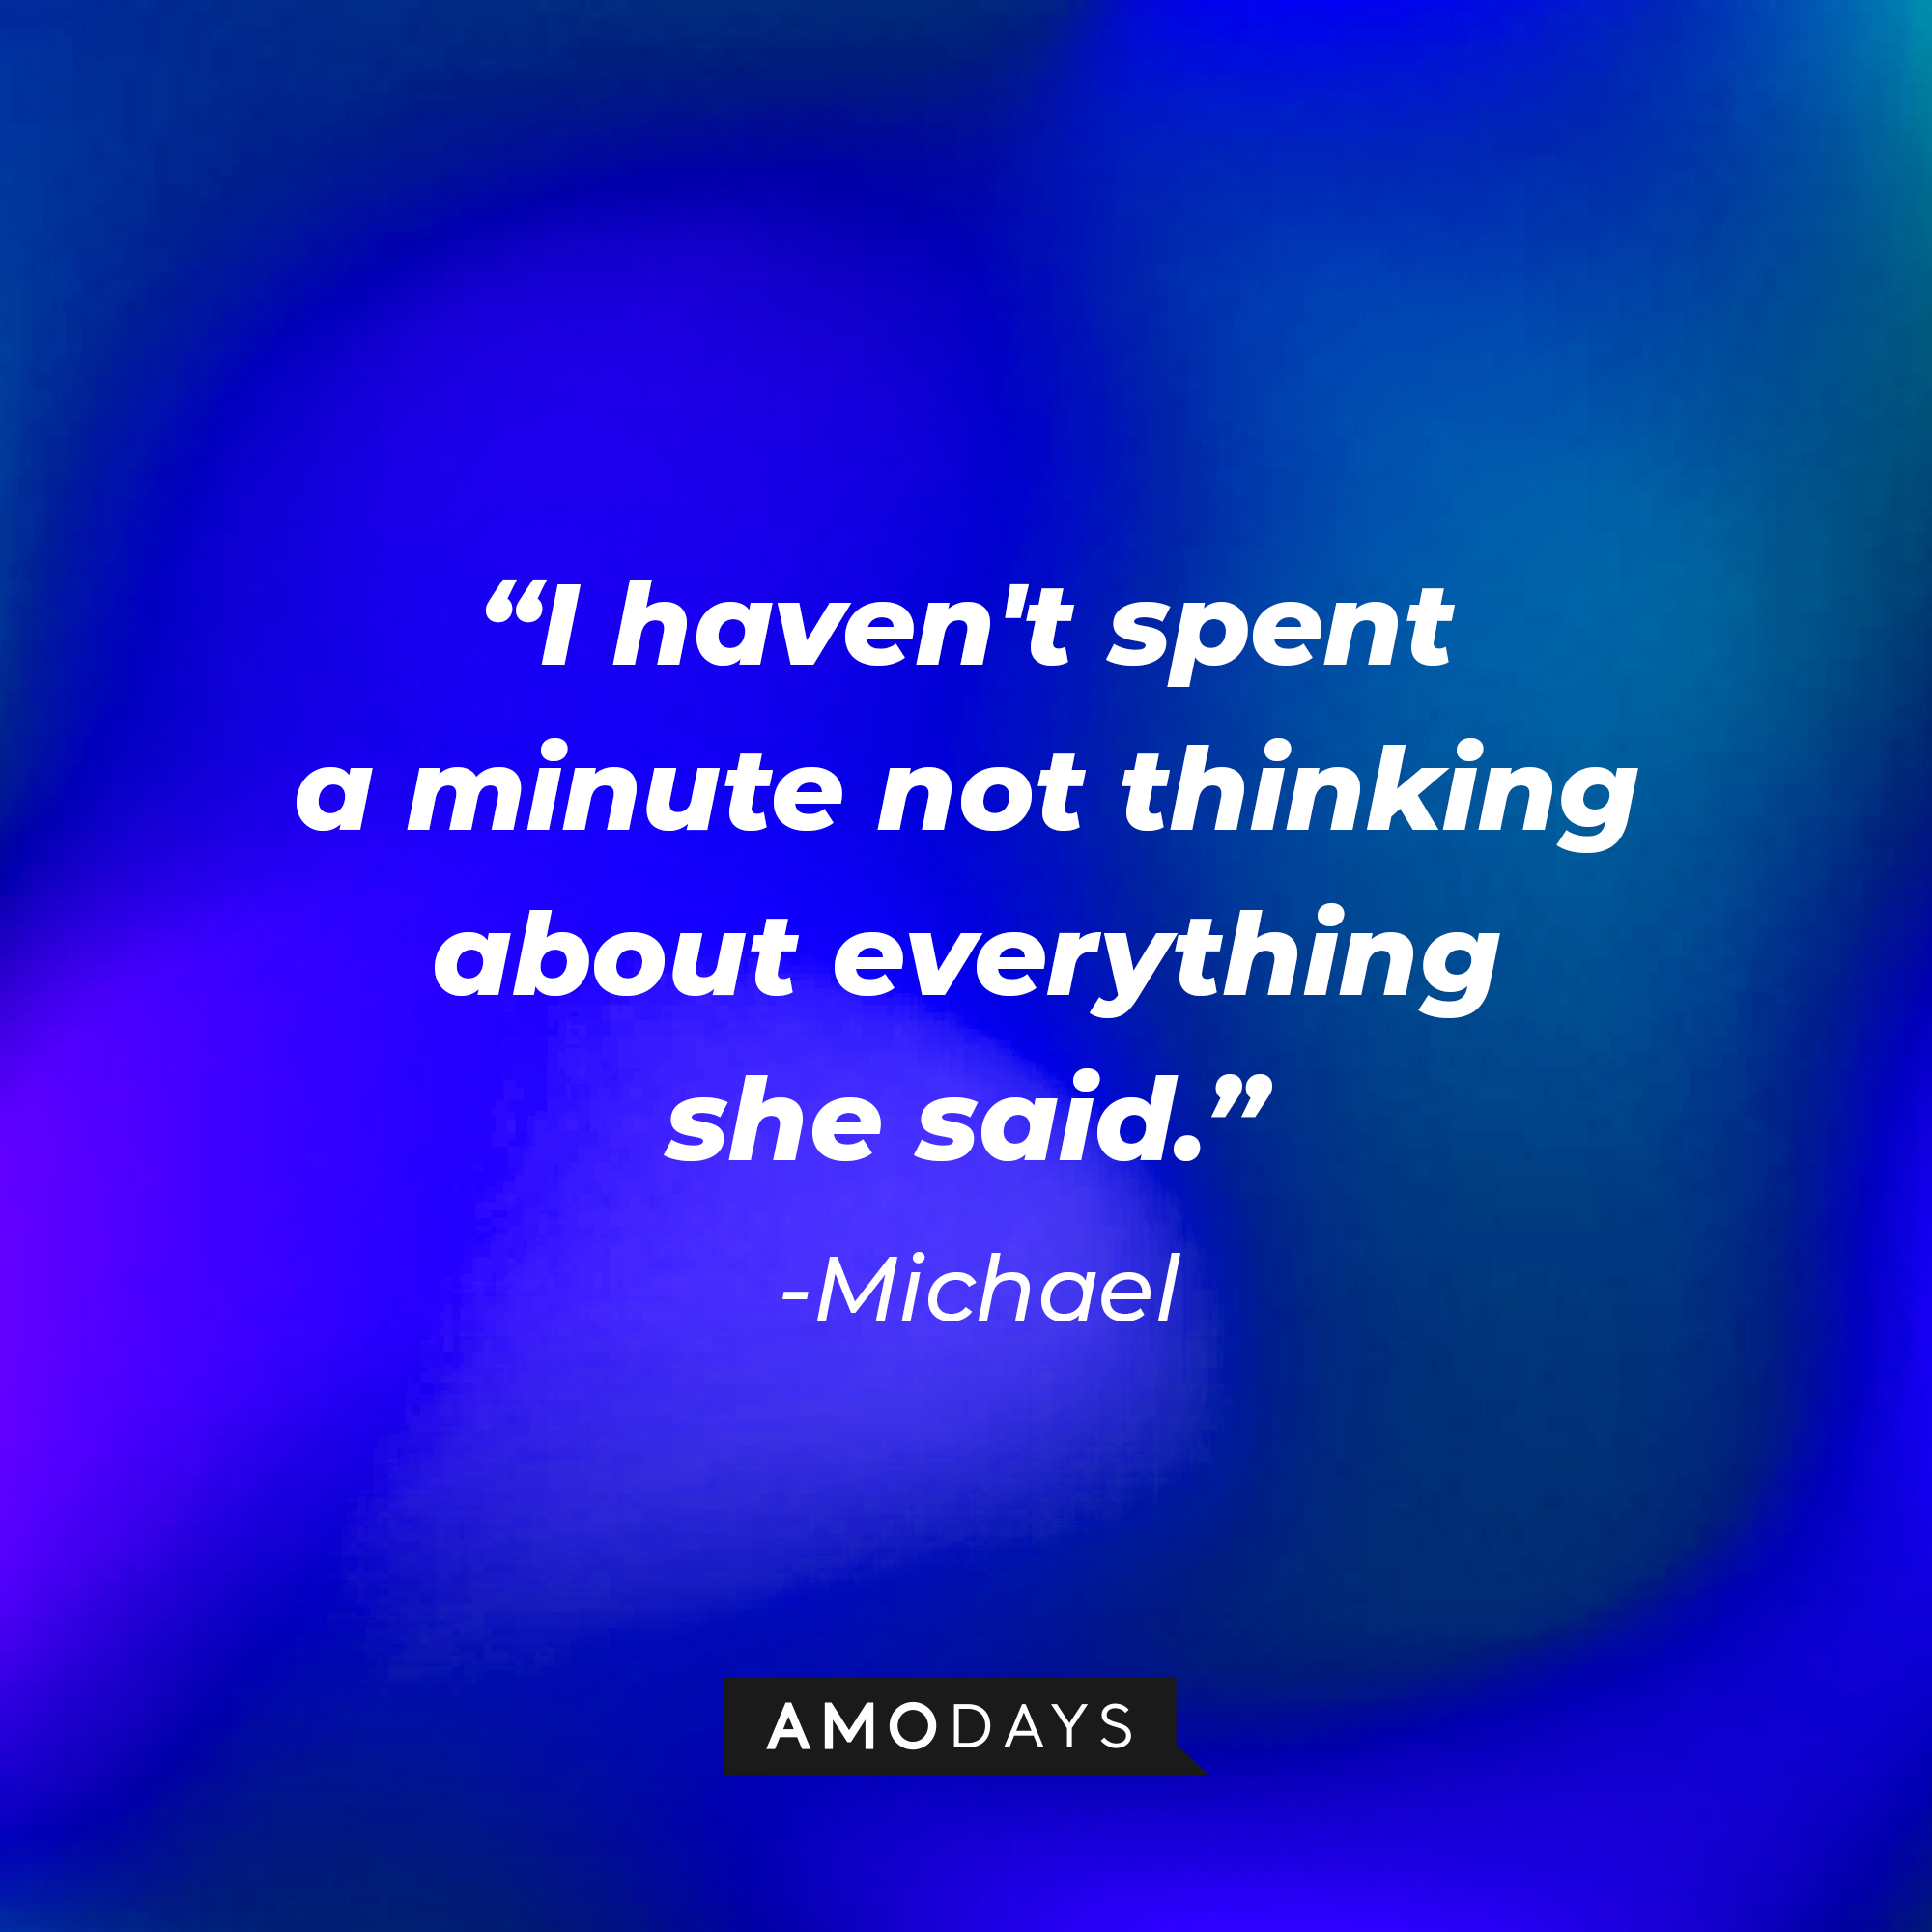 Michael’s quote from “Modern Love”: "I haven't spent a minute not thinking about everything she said." | Source: AmoDays